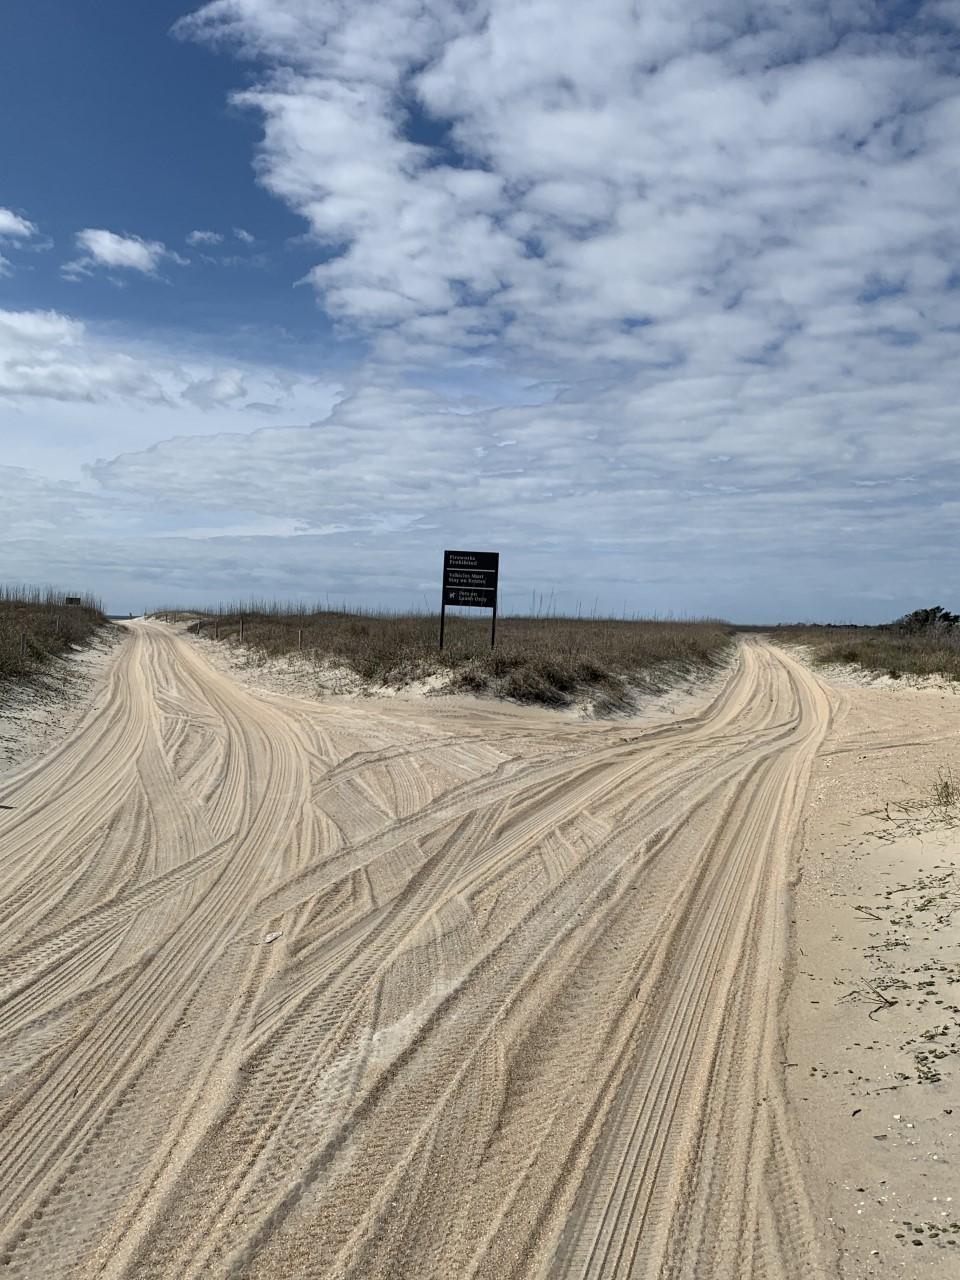 a sand trail on the island shows the tracks of vehicle use